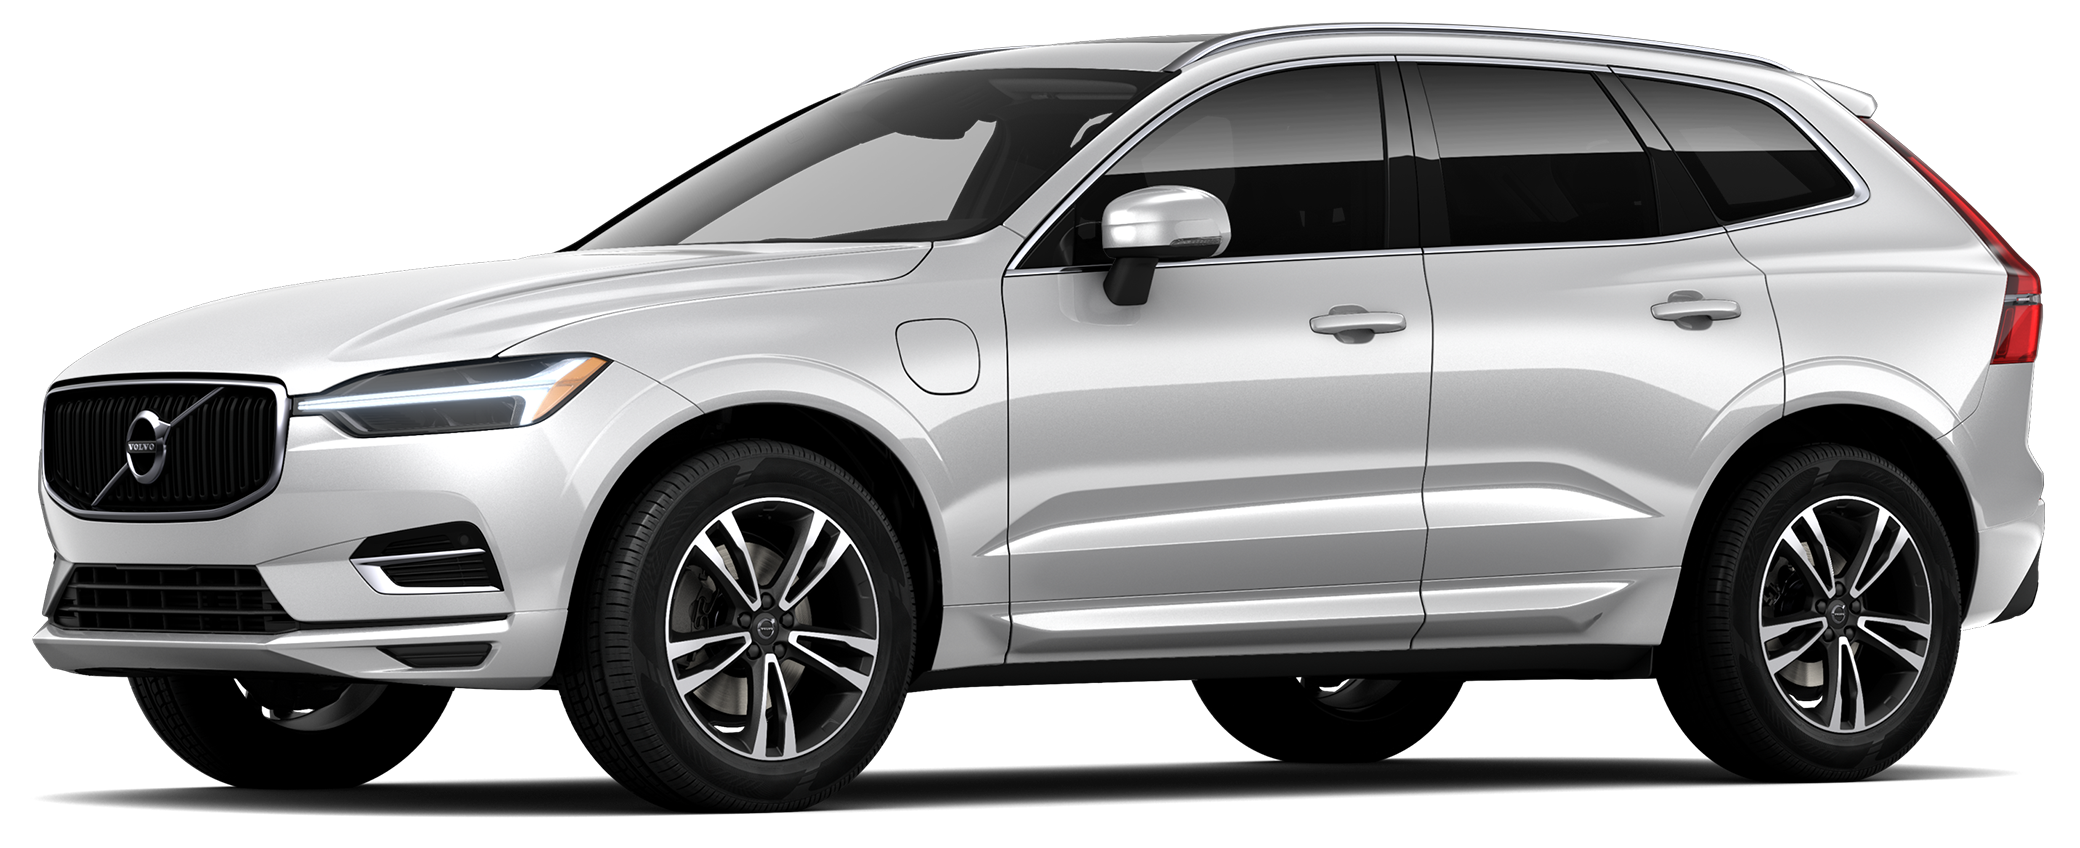 2020 Volvo XC60 Hybrid Incentives, Specials & Offers in Lawrenceville NJ